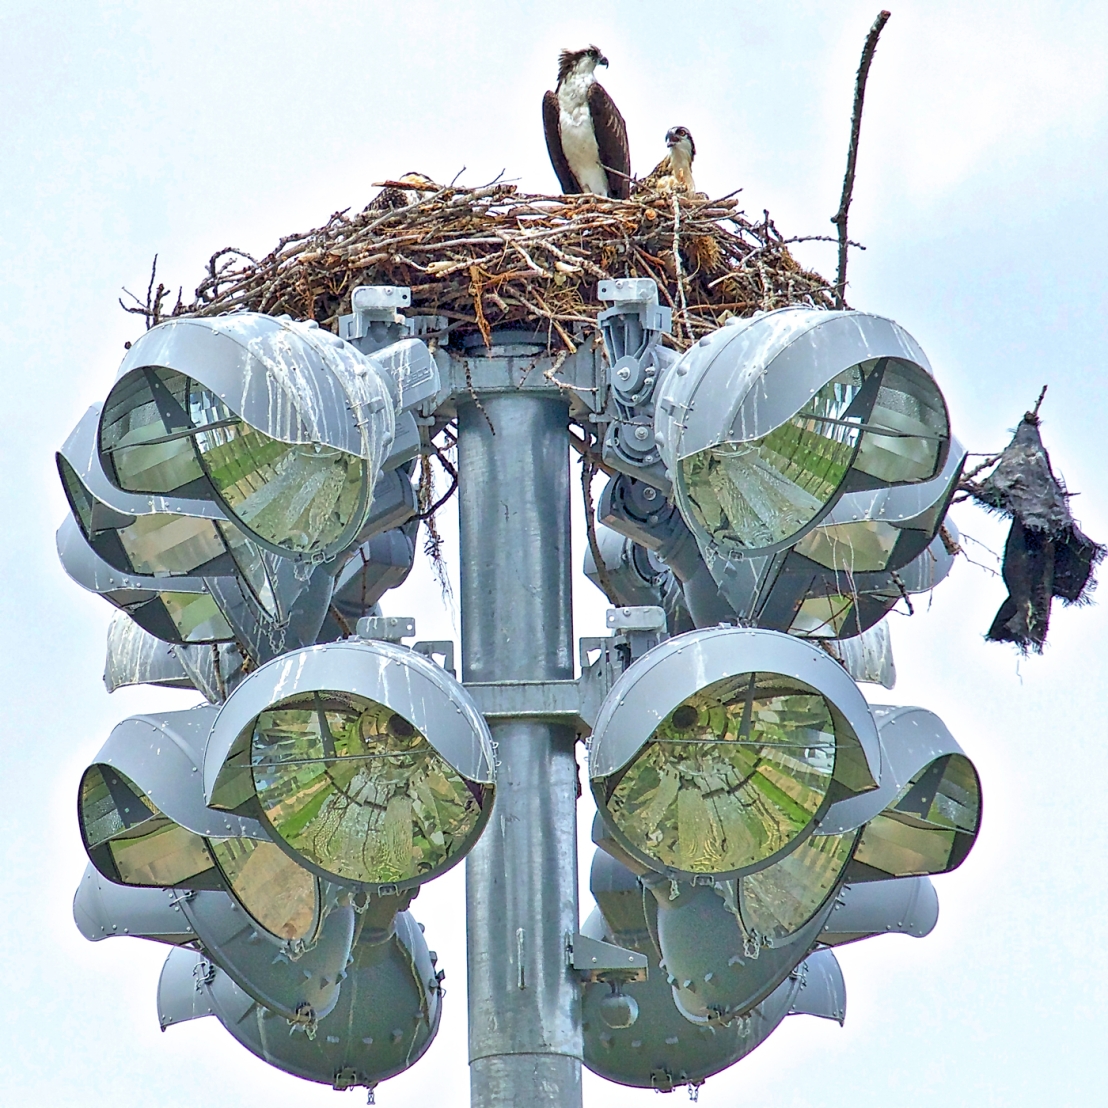 Osprey - "Mom said to ask you! Can I fly?"